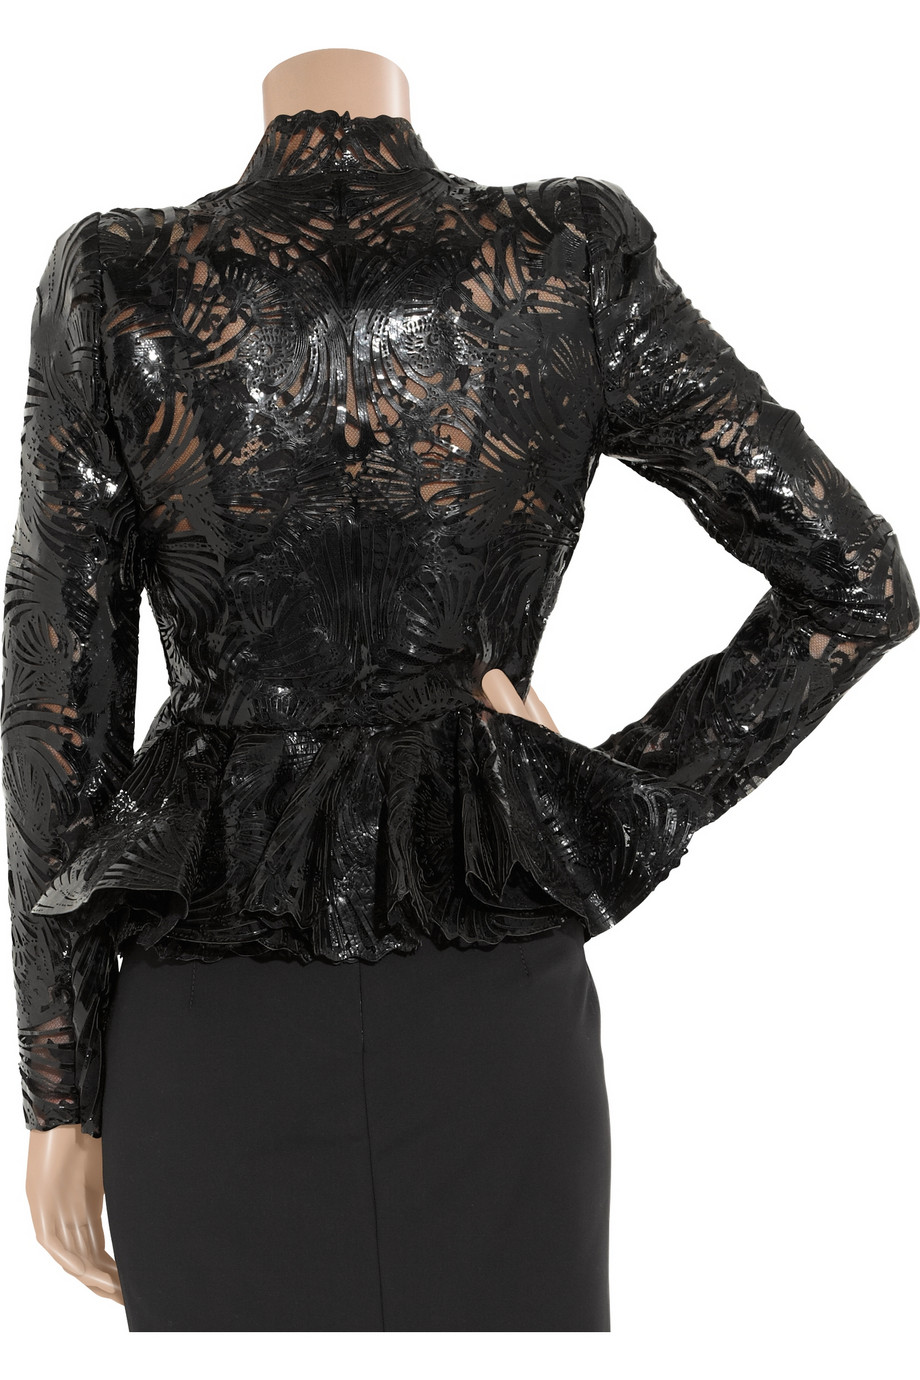 Alexander McQueen Lasercut Patent Leather and Lace Jacket in Black - Lyst